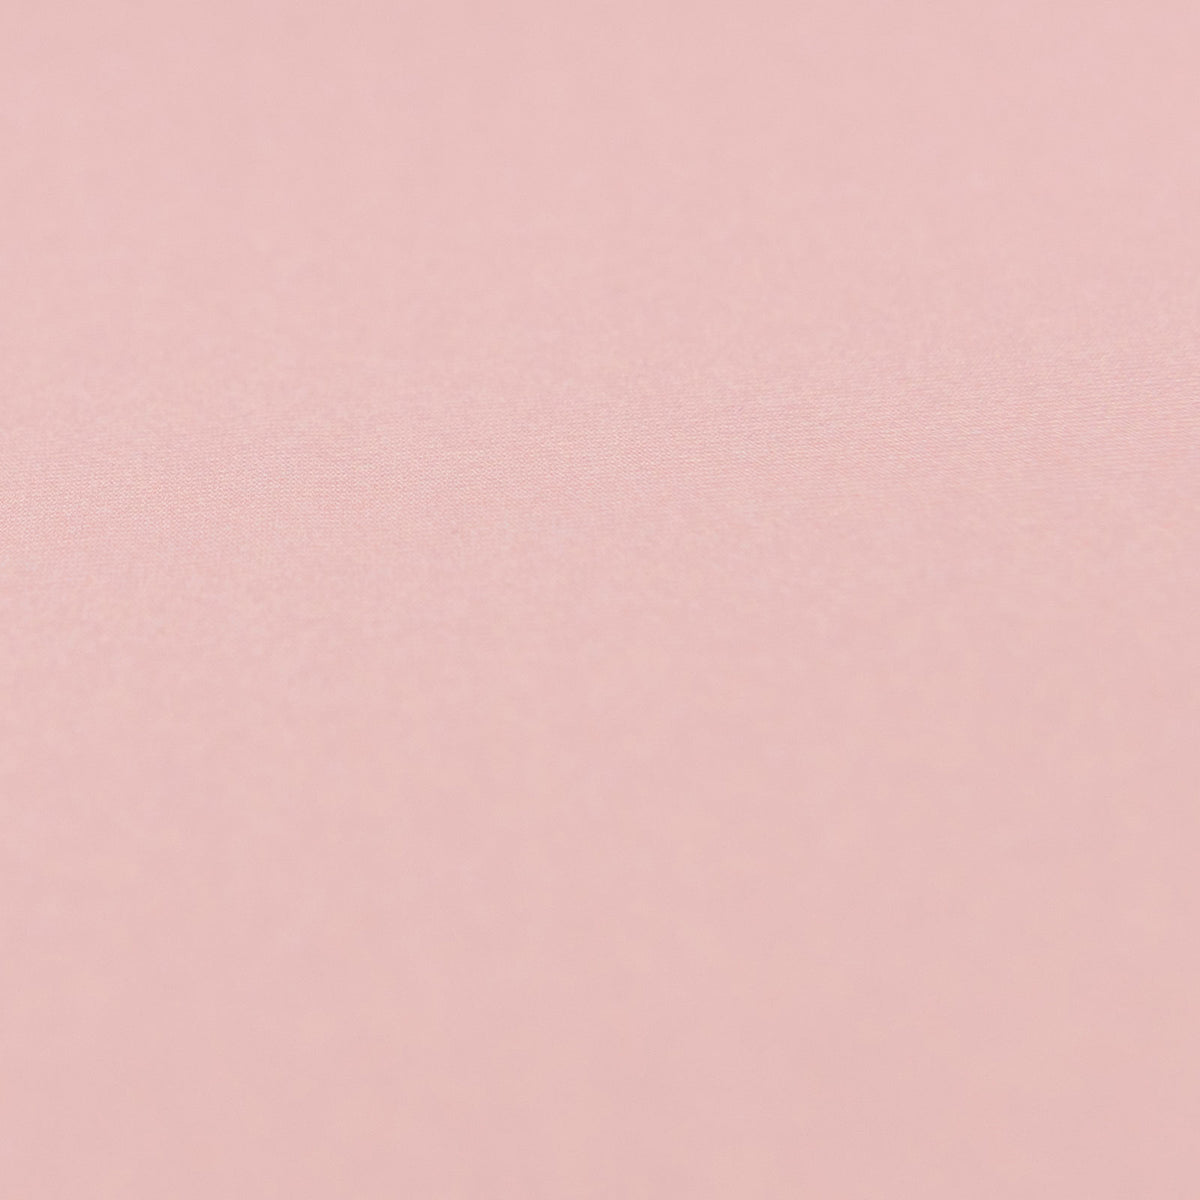 Solid color - First blush pink